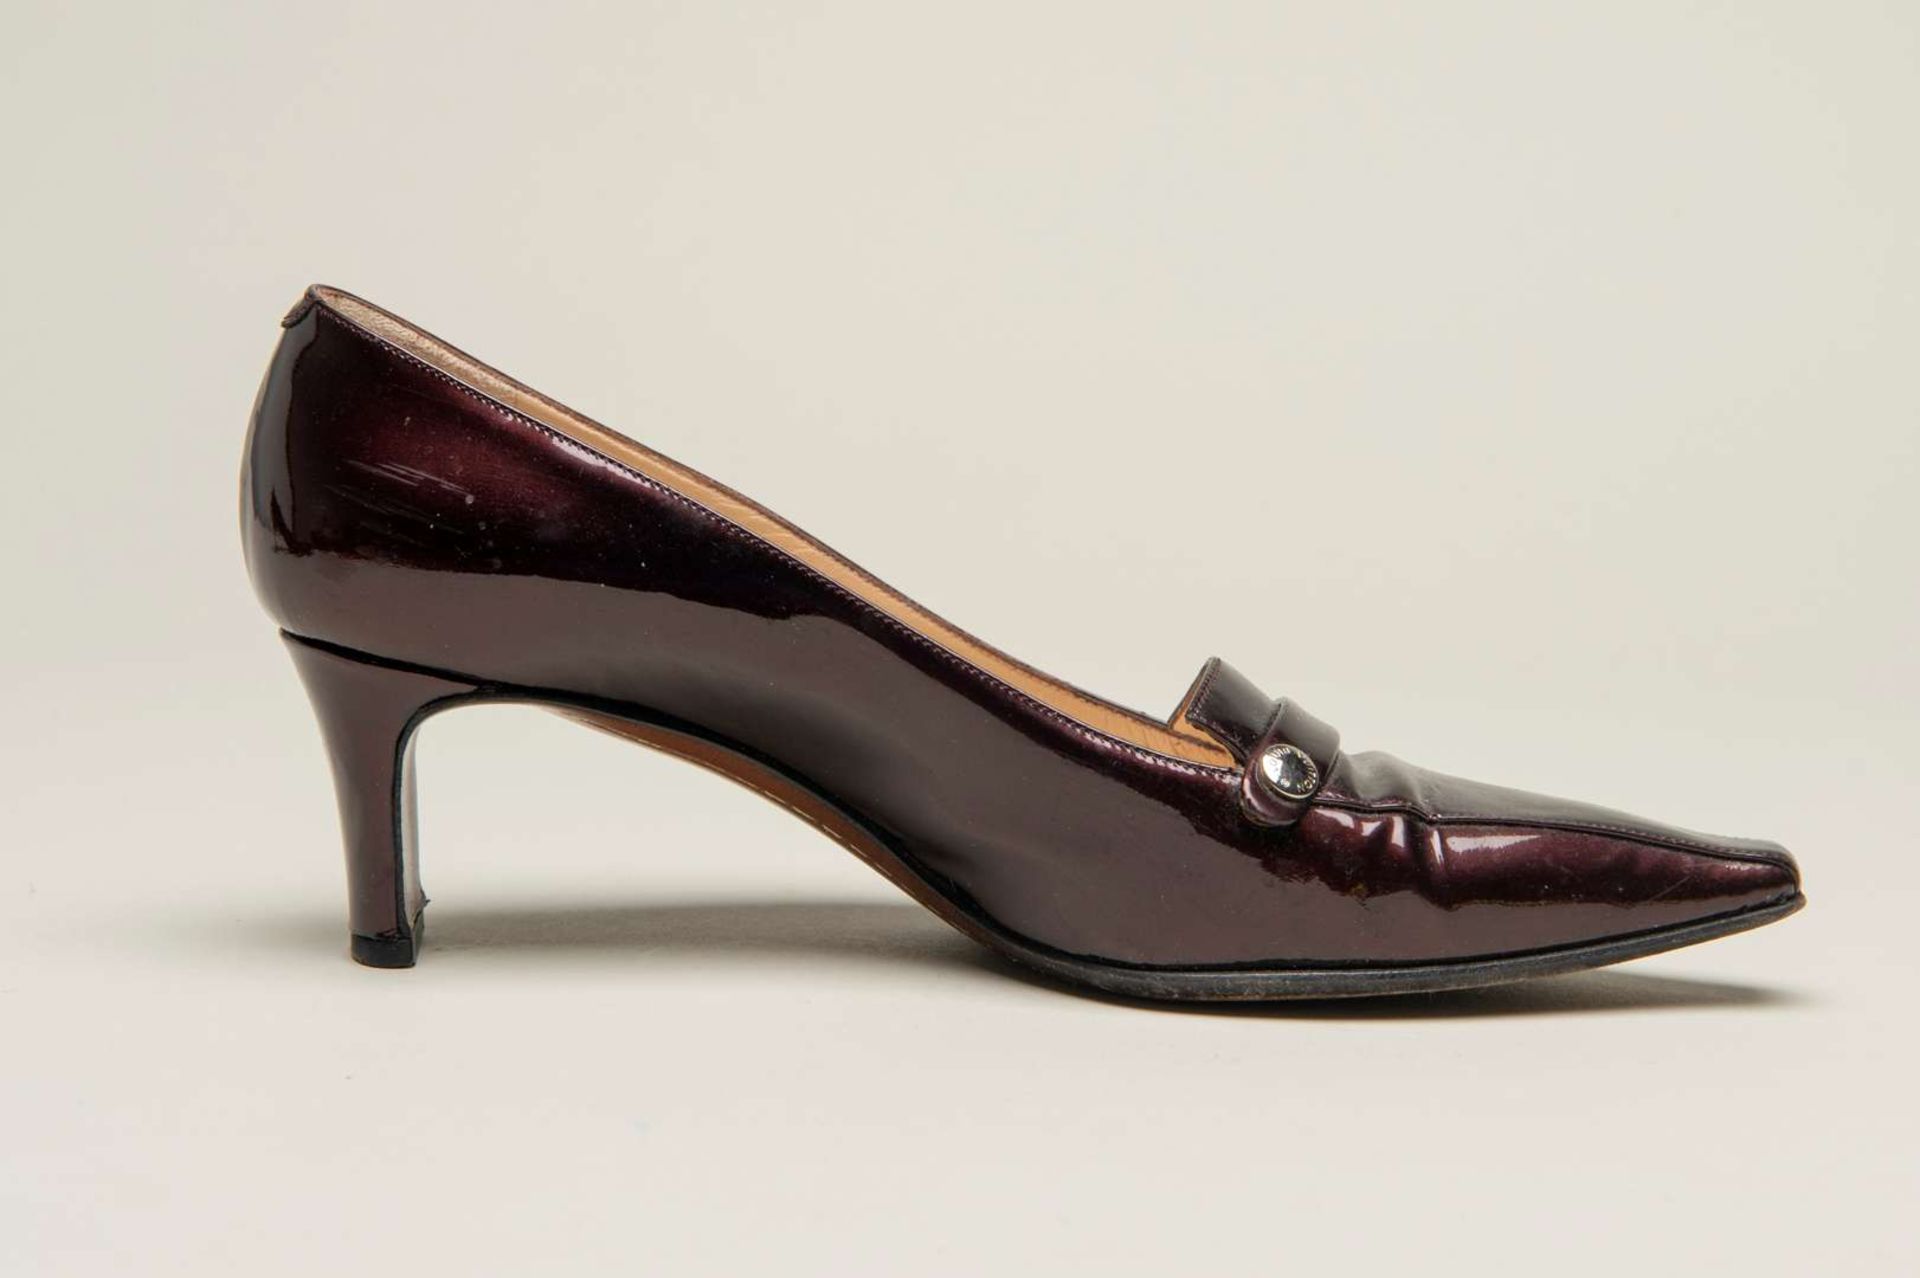 LOUIS VUITTON, a pair of dark bronze, patent leather pumps - Image 4 of 6